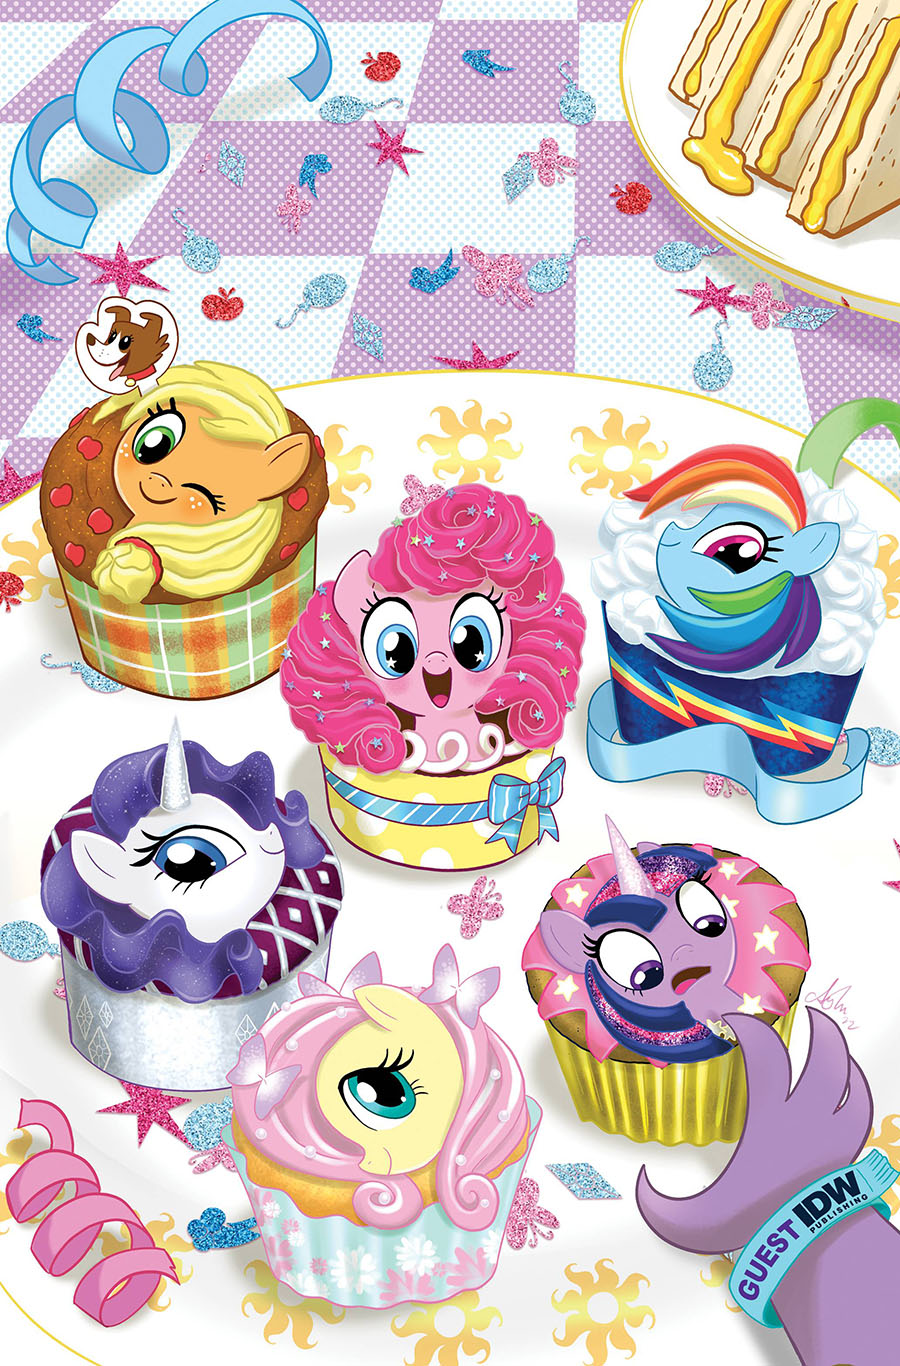 My Little Pony Friendship Is Magic 10th Anniversary Edition #1 (One Shot) Cover D Incentive Amy Mebberson Variant Cover